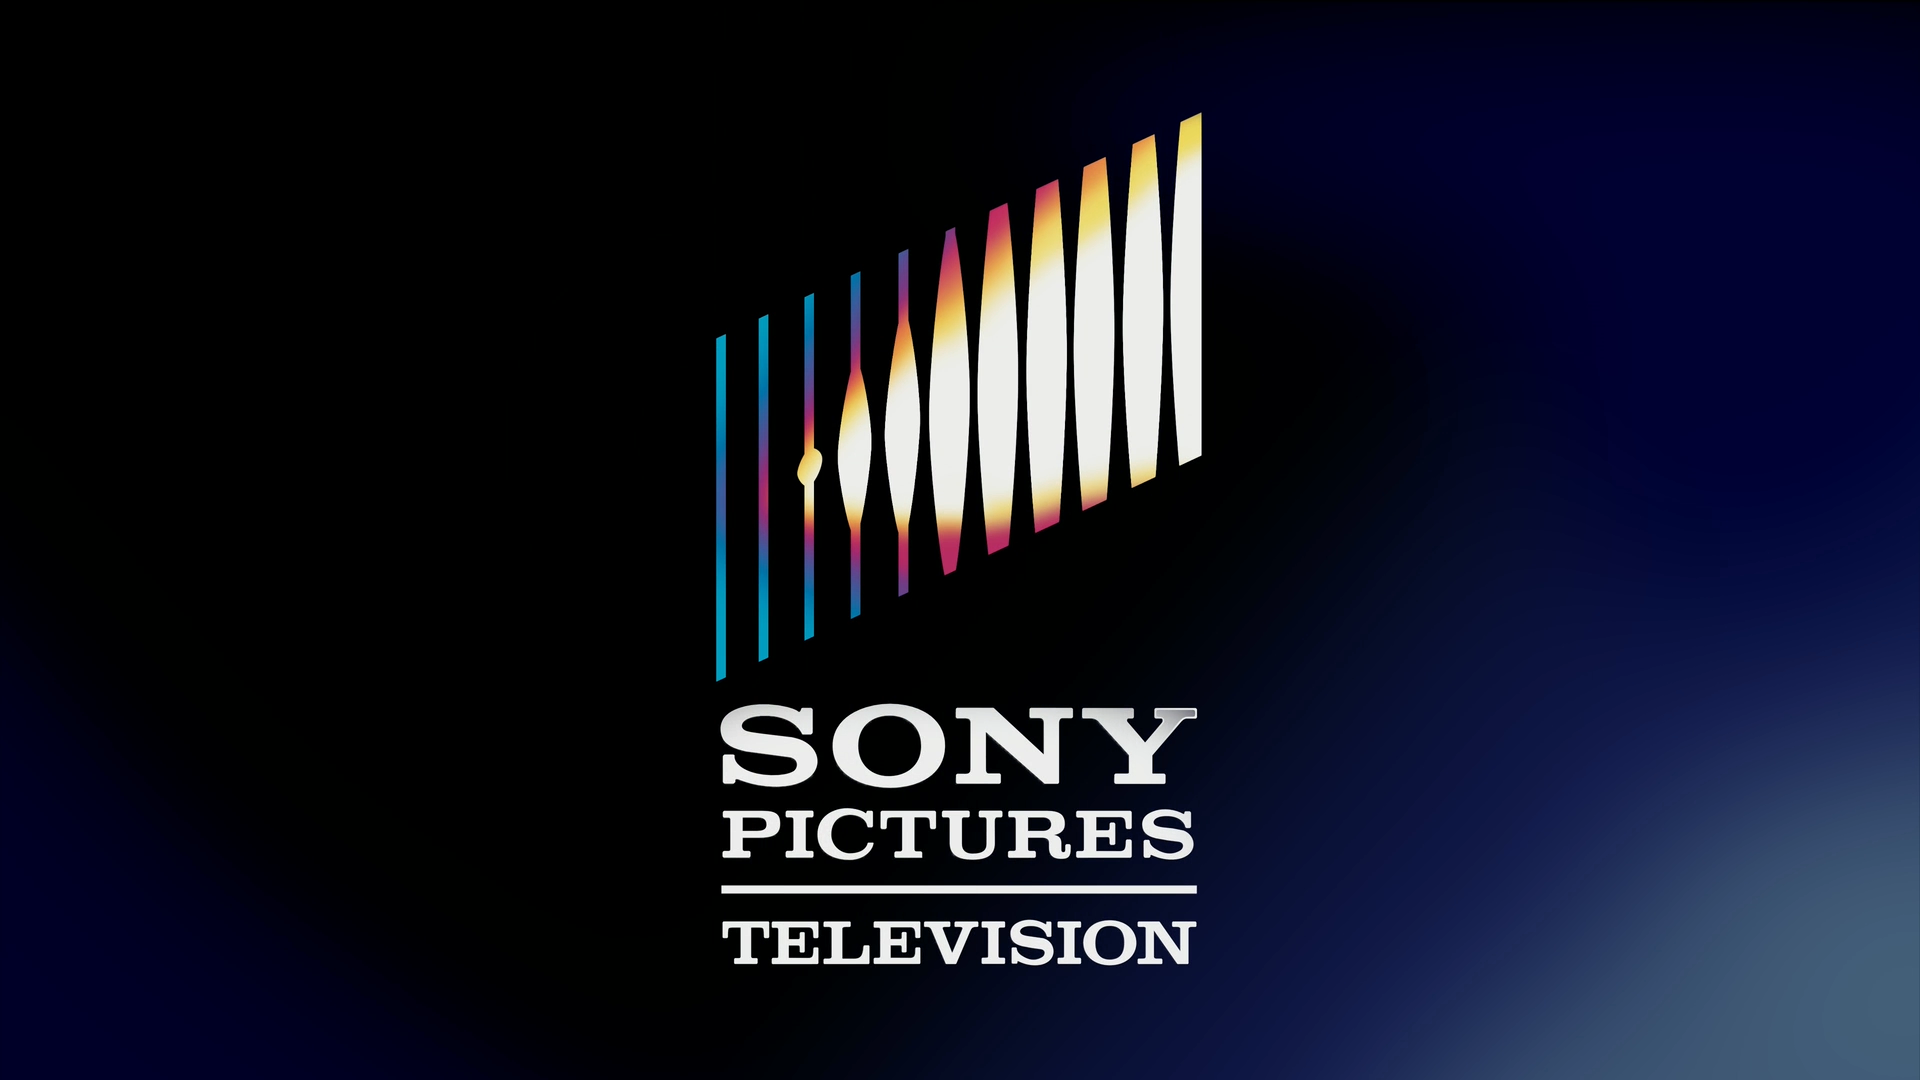 Sony Pictures Television